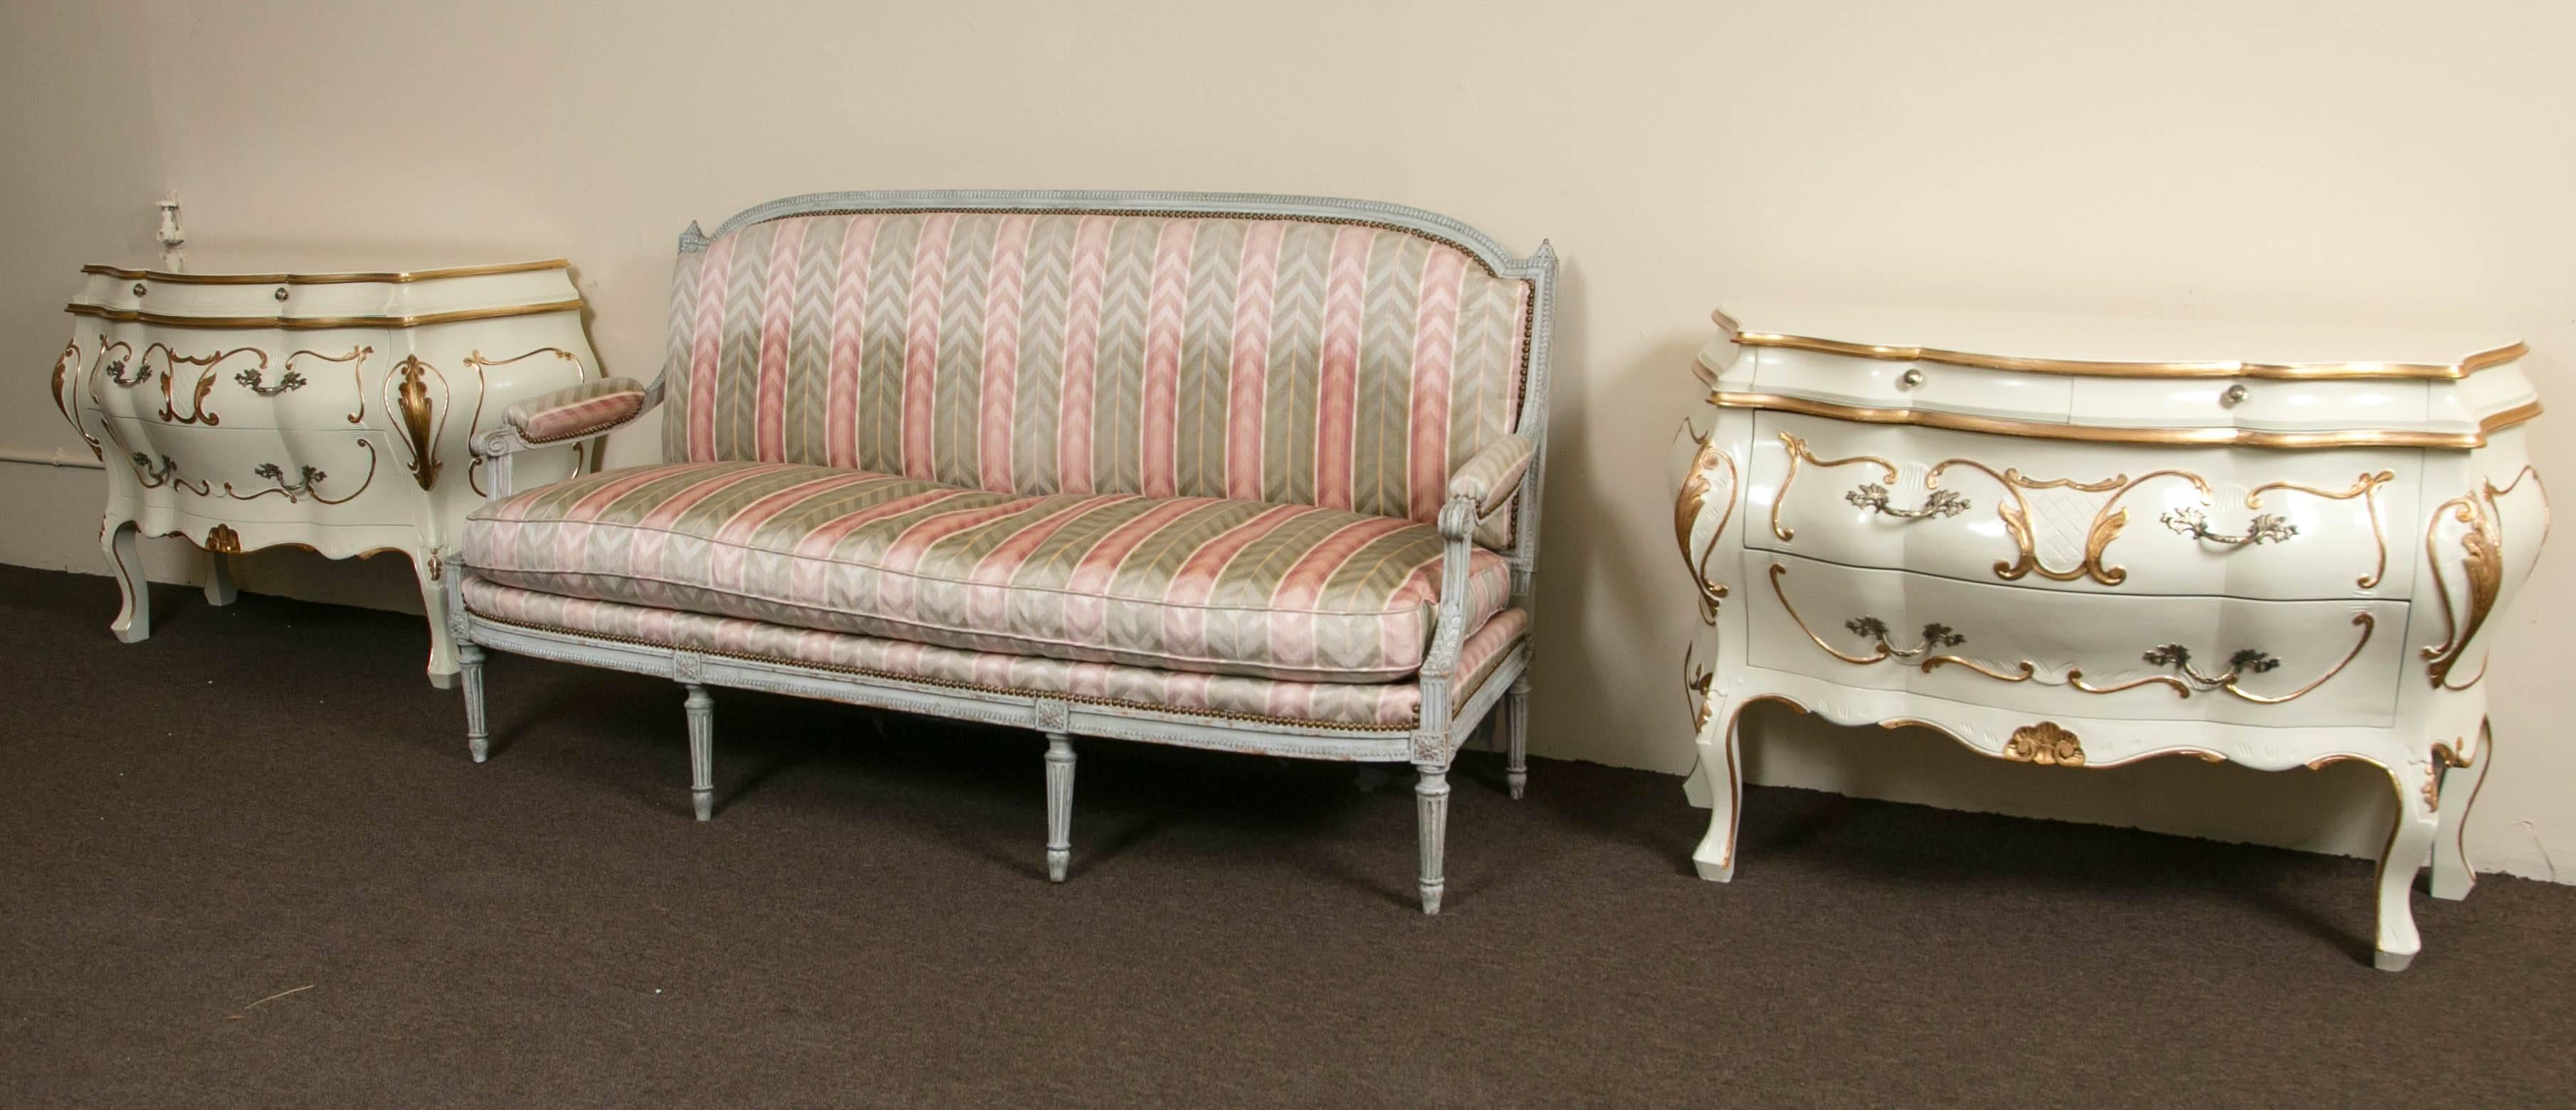 Distressed Paint Decorated Louis XVI Style Settee attrib to Maison Jansen. A wonderfully detailed sofa by one of the most sought after designers. The distressed off white paint decorated frame  supported by four front and two rear legs. In a fine